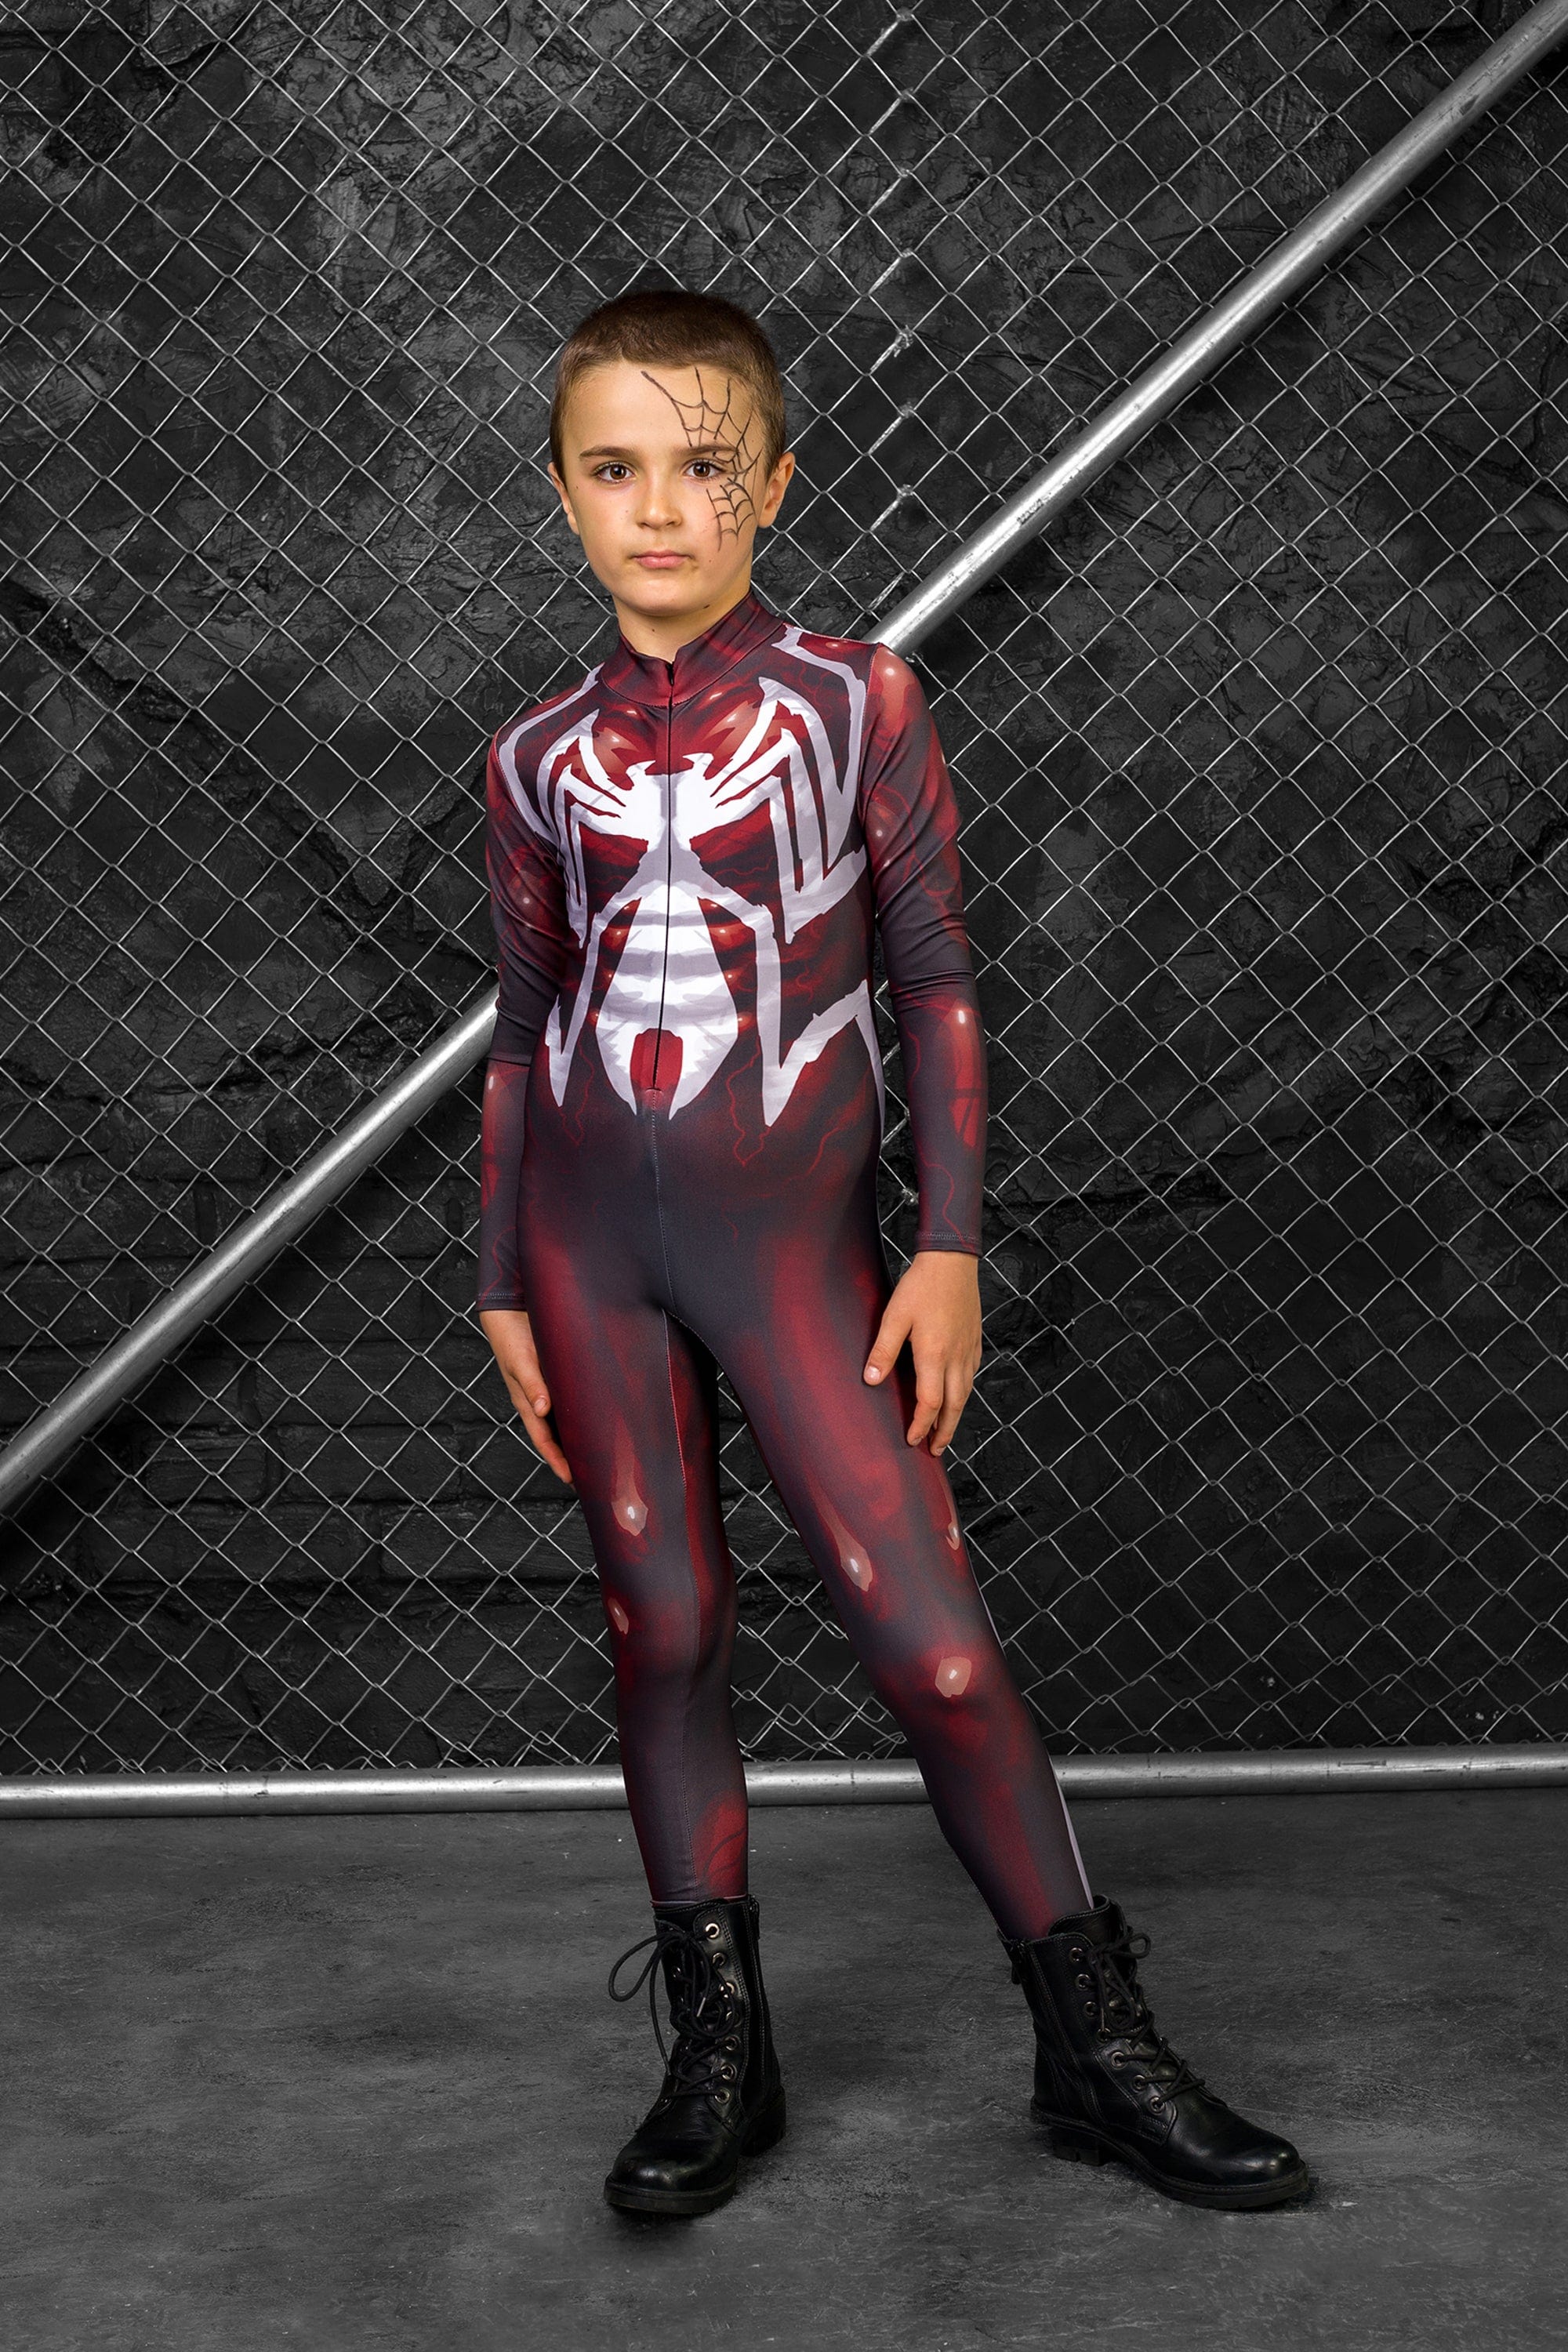 Red Spider Boys Costume